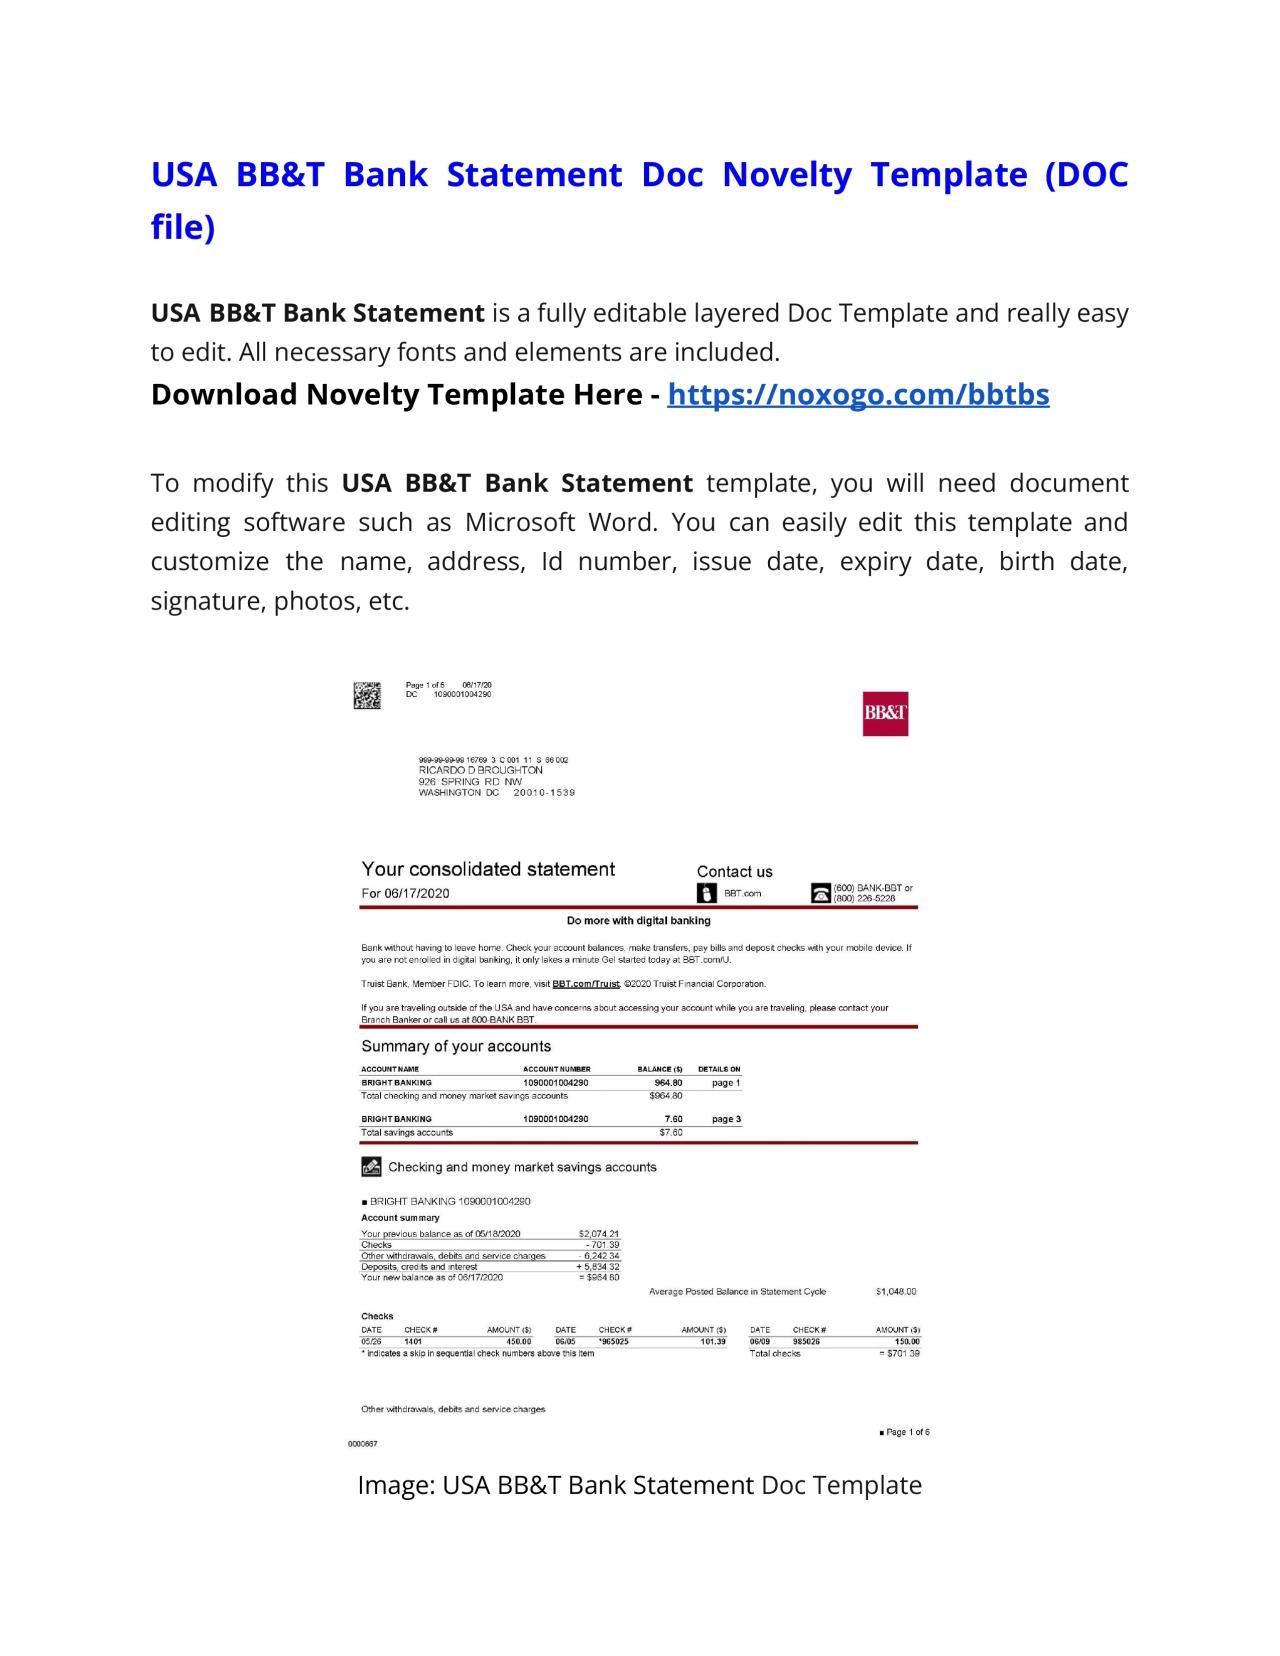 BB&T Bank Statement DOC Novelty Template